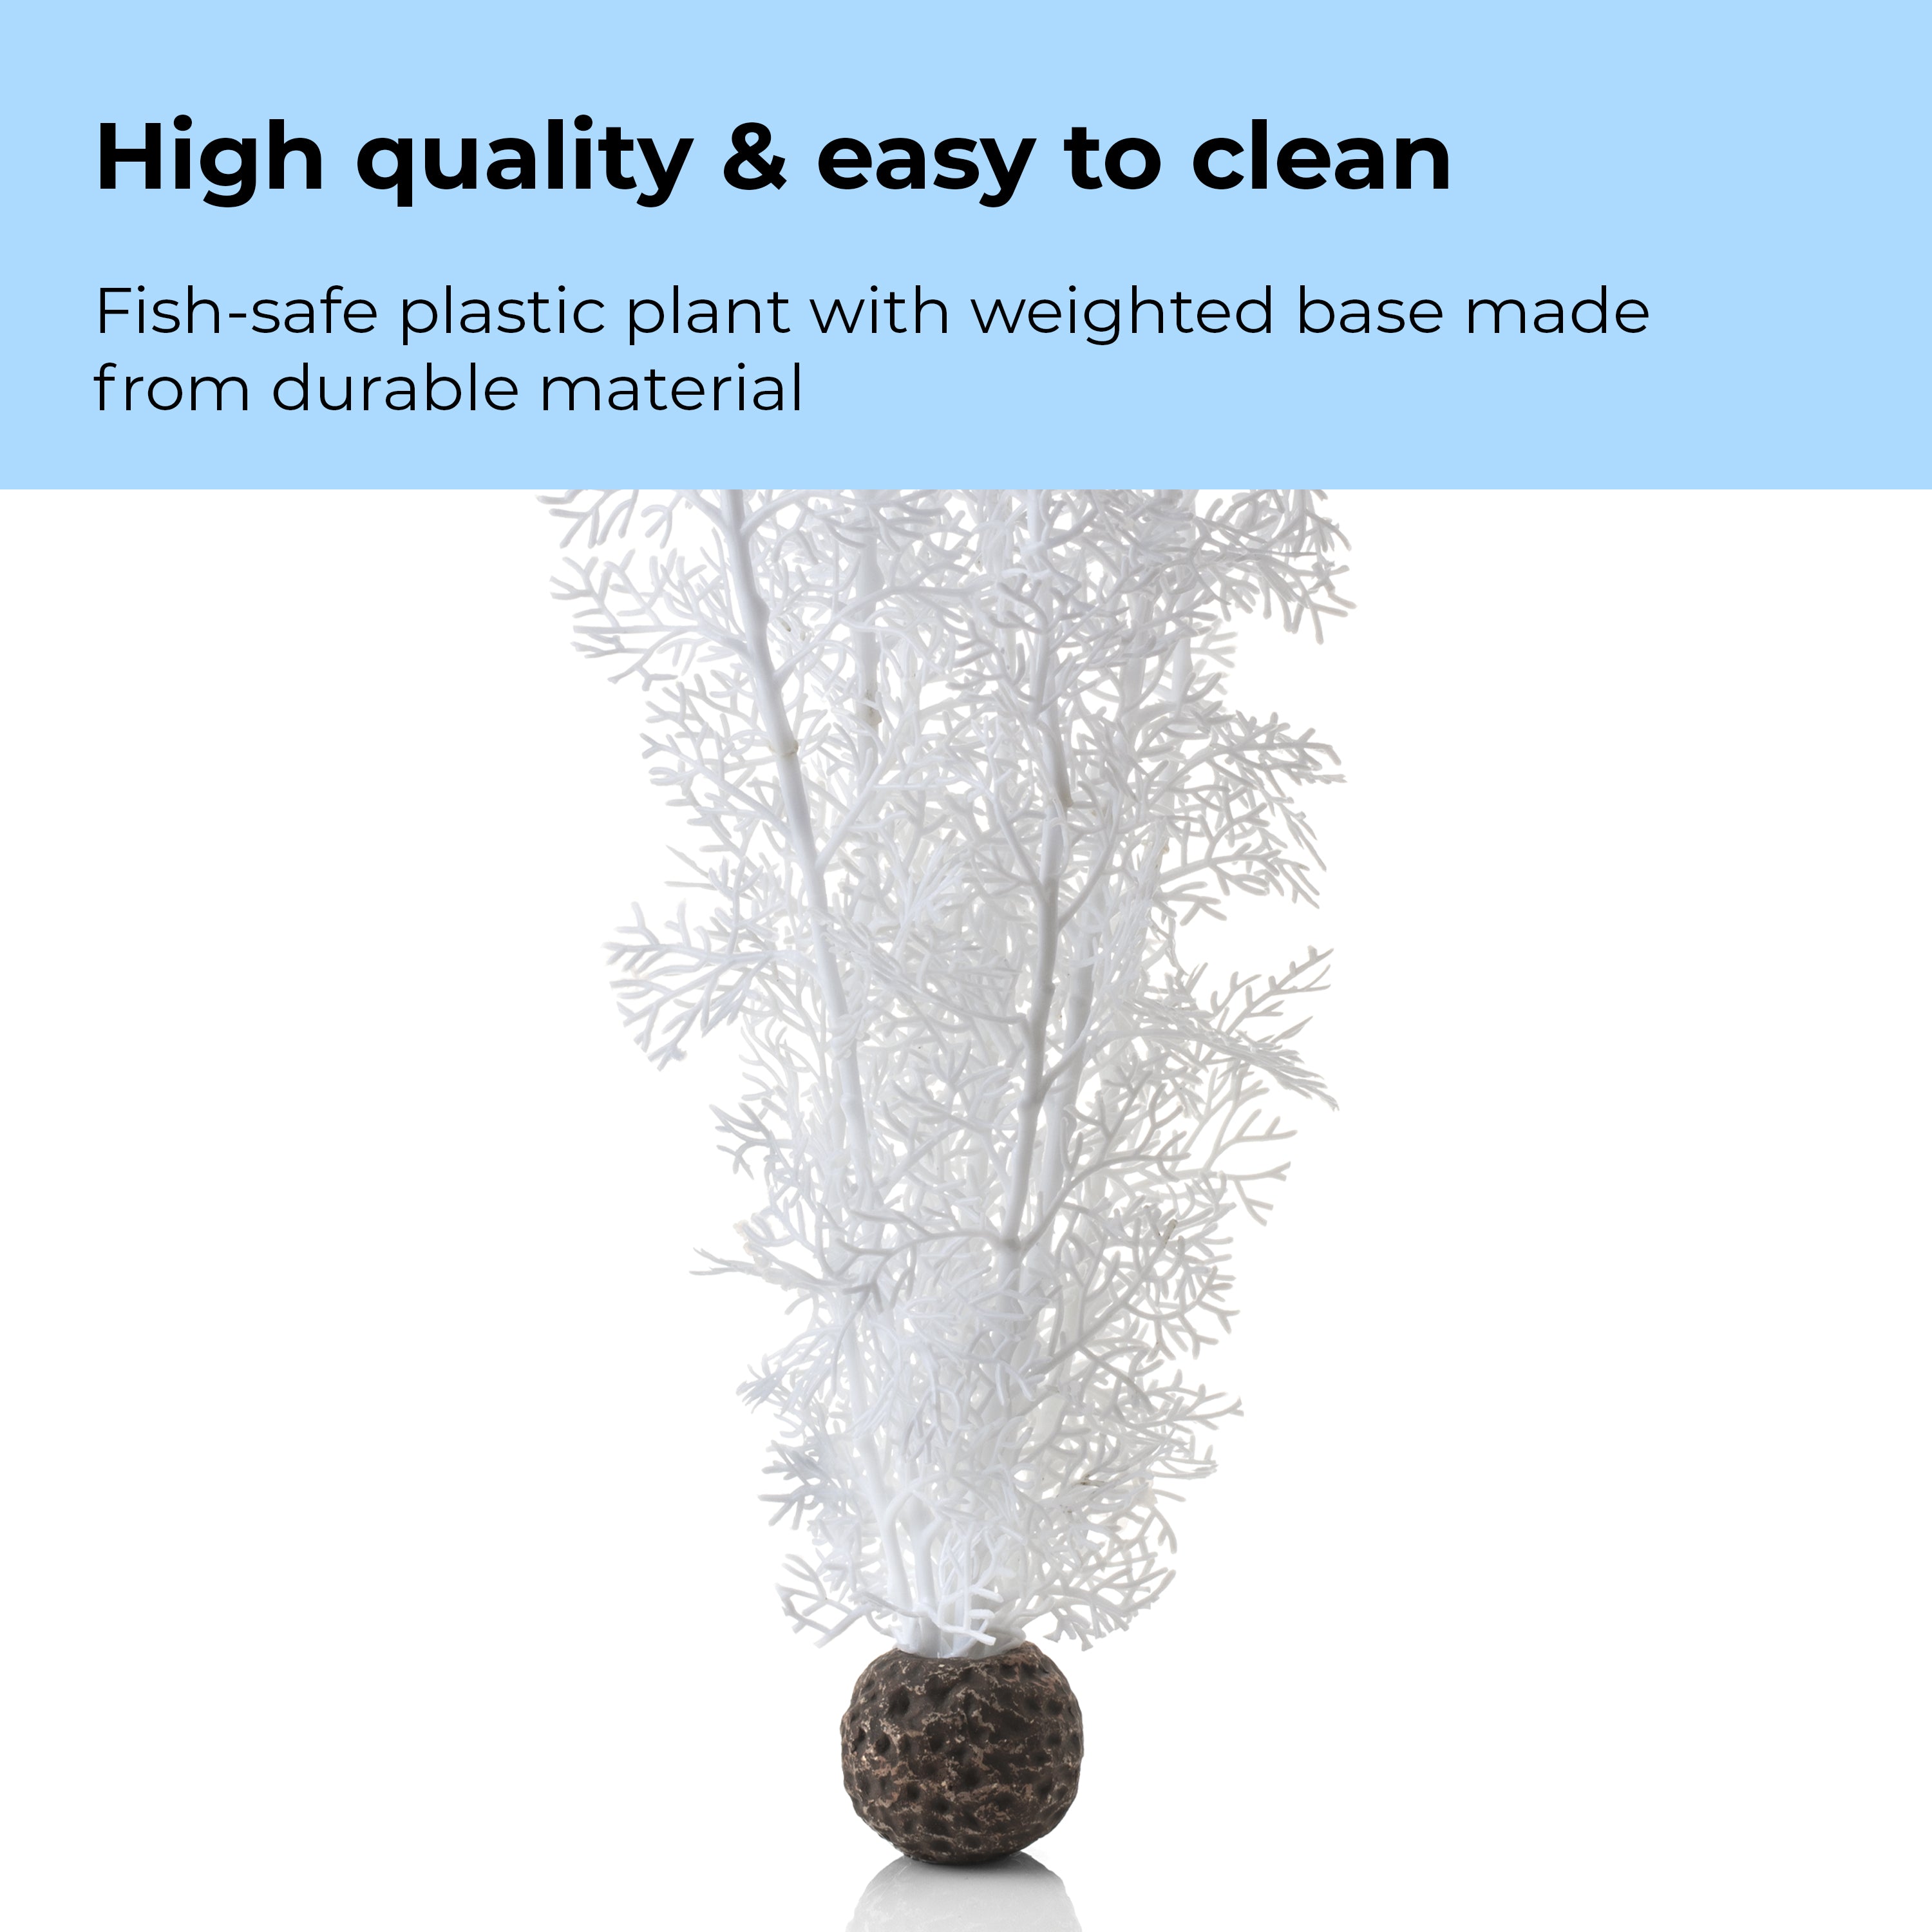 Large Sea Fan - High quality & easy to clean